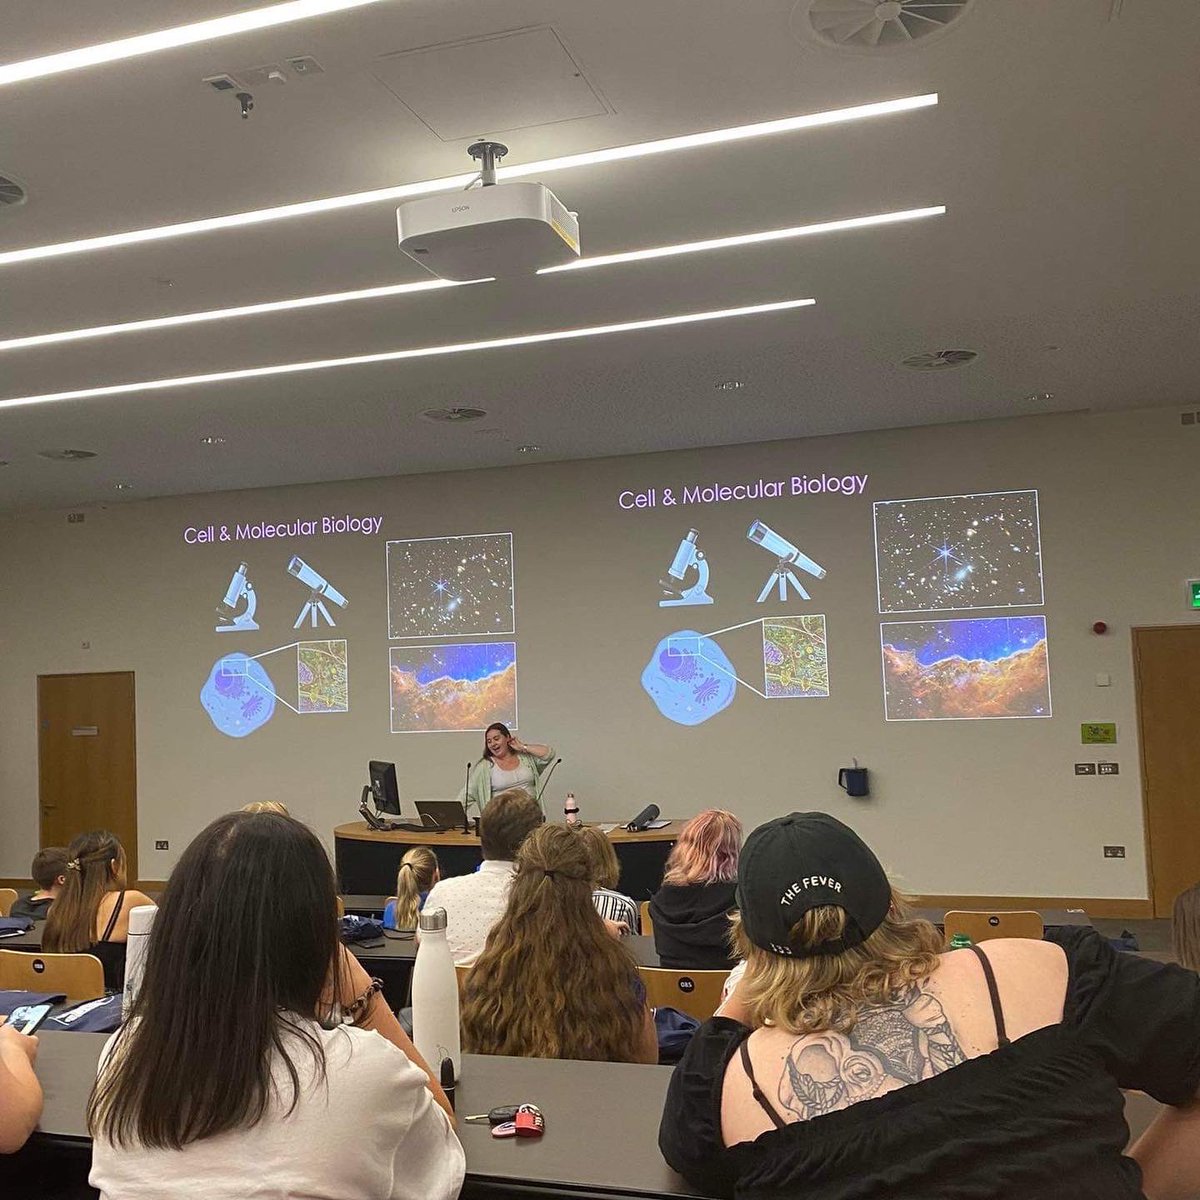 Really enjoyed getting to talk with some biology students from the University of Gröningen today about my time in @UCDSBES studying Cell & Molecular Biology! The other final frontier..? 🤓🧫🔬

Thank you to @WimGMeijer & @ucd_biosoc for organising!